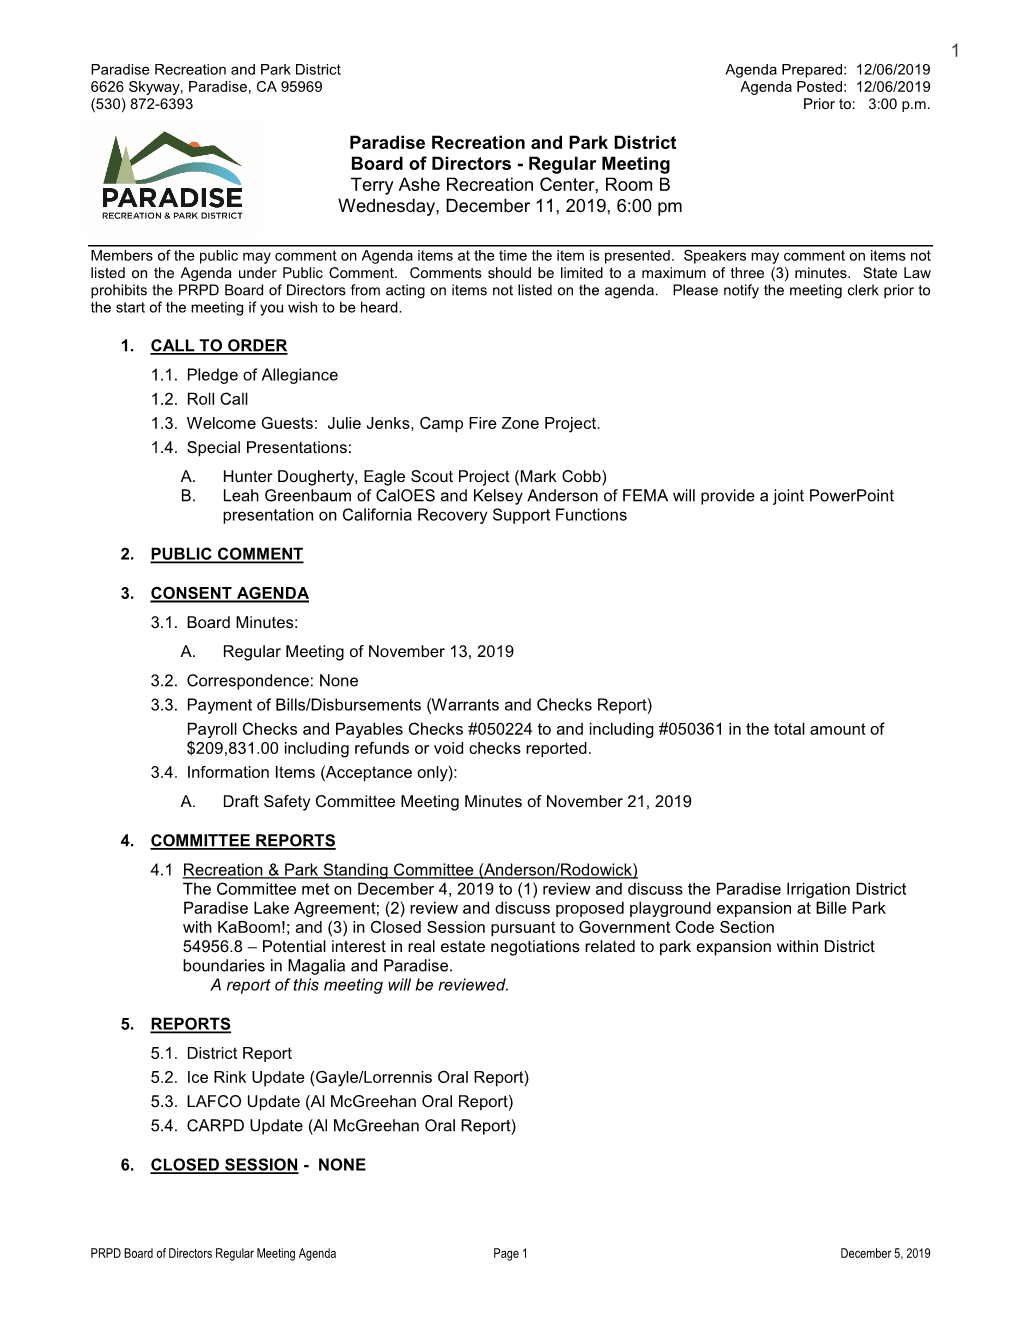 Paradise Recreation and Park District Board of Directors - Regular Meeting Terry Ashe Recreation Center, Room B Wednesday, December 11, 2019, 6:00 Pm